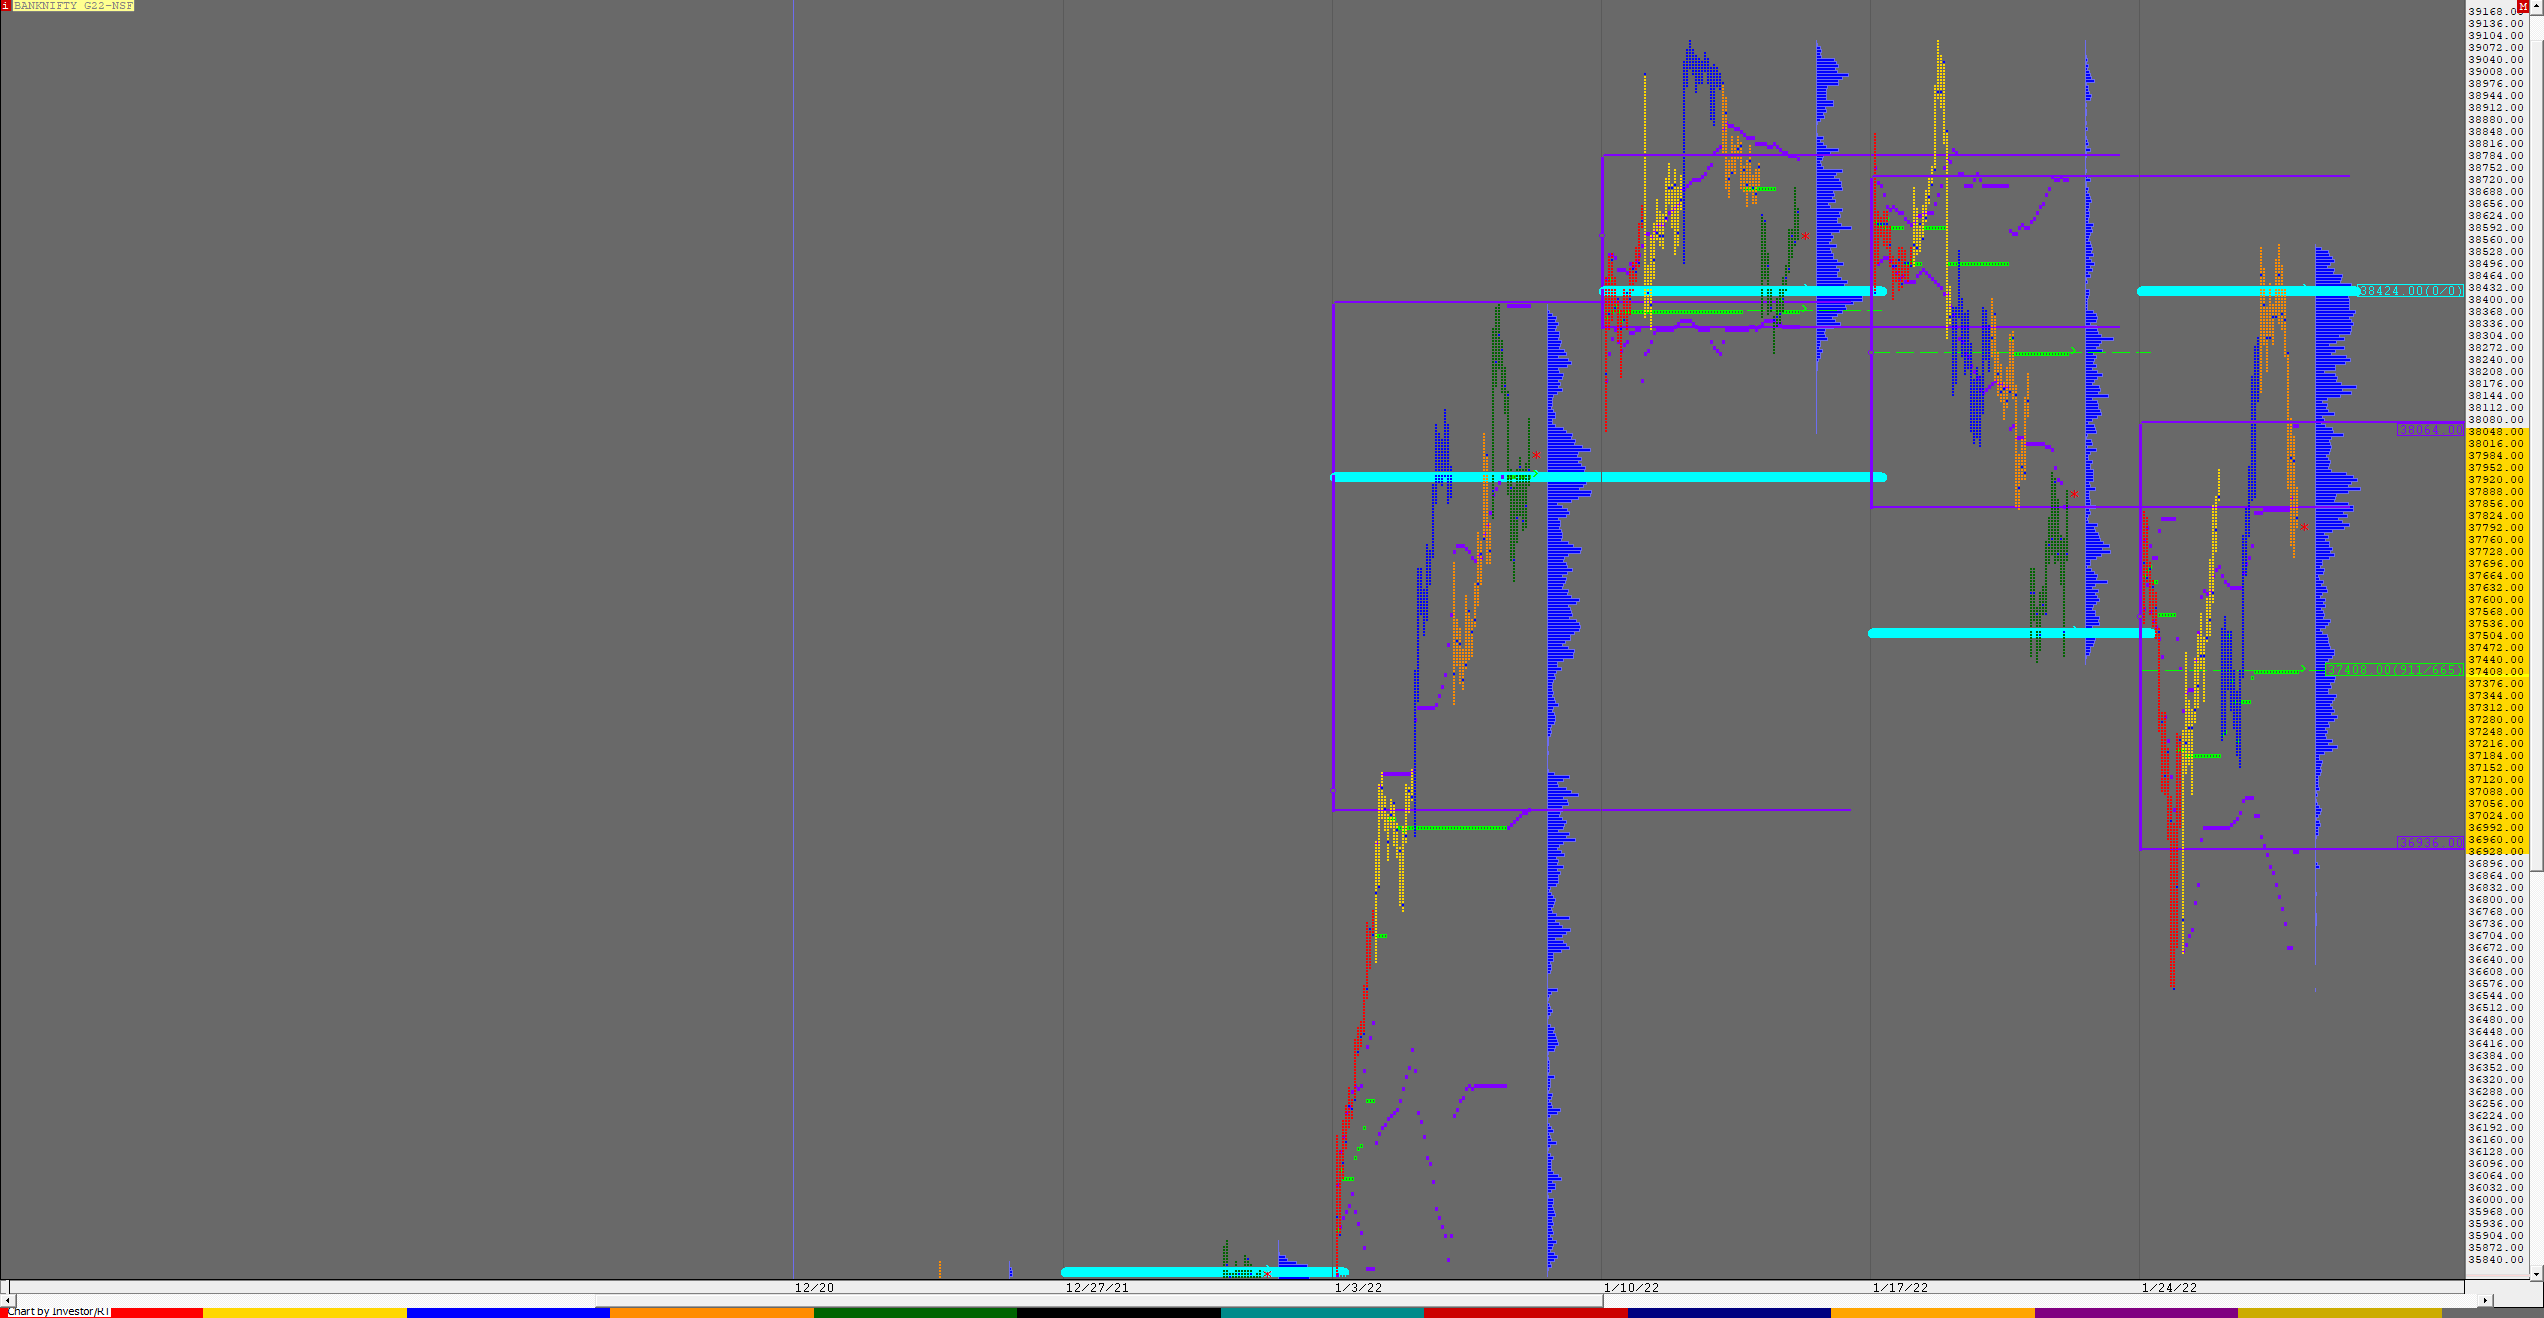 Bnf F 4 Weekly Charts (24Th To 28Th Jan 2022) And Market Profile Analysis Banknifty Futures, Charts, Day Trading, Intraday Trading, Intraday Trading Strategies, Market Profile, Market Profile Trading Strategies, Nifty Futures, Order Flow Analysis, Support And Resistance, Technical Analysis, Trading Strategies, Volume Profile Trading